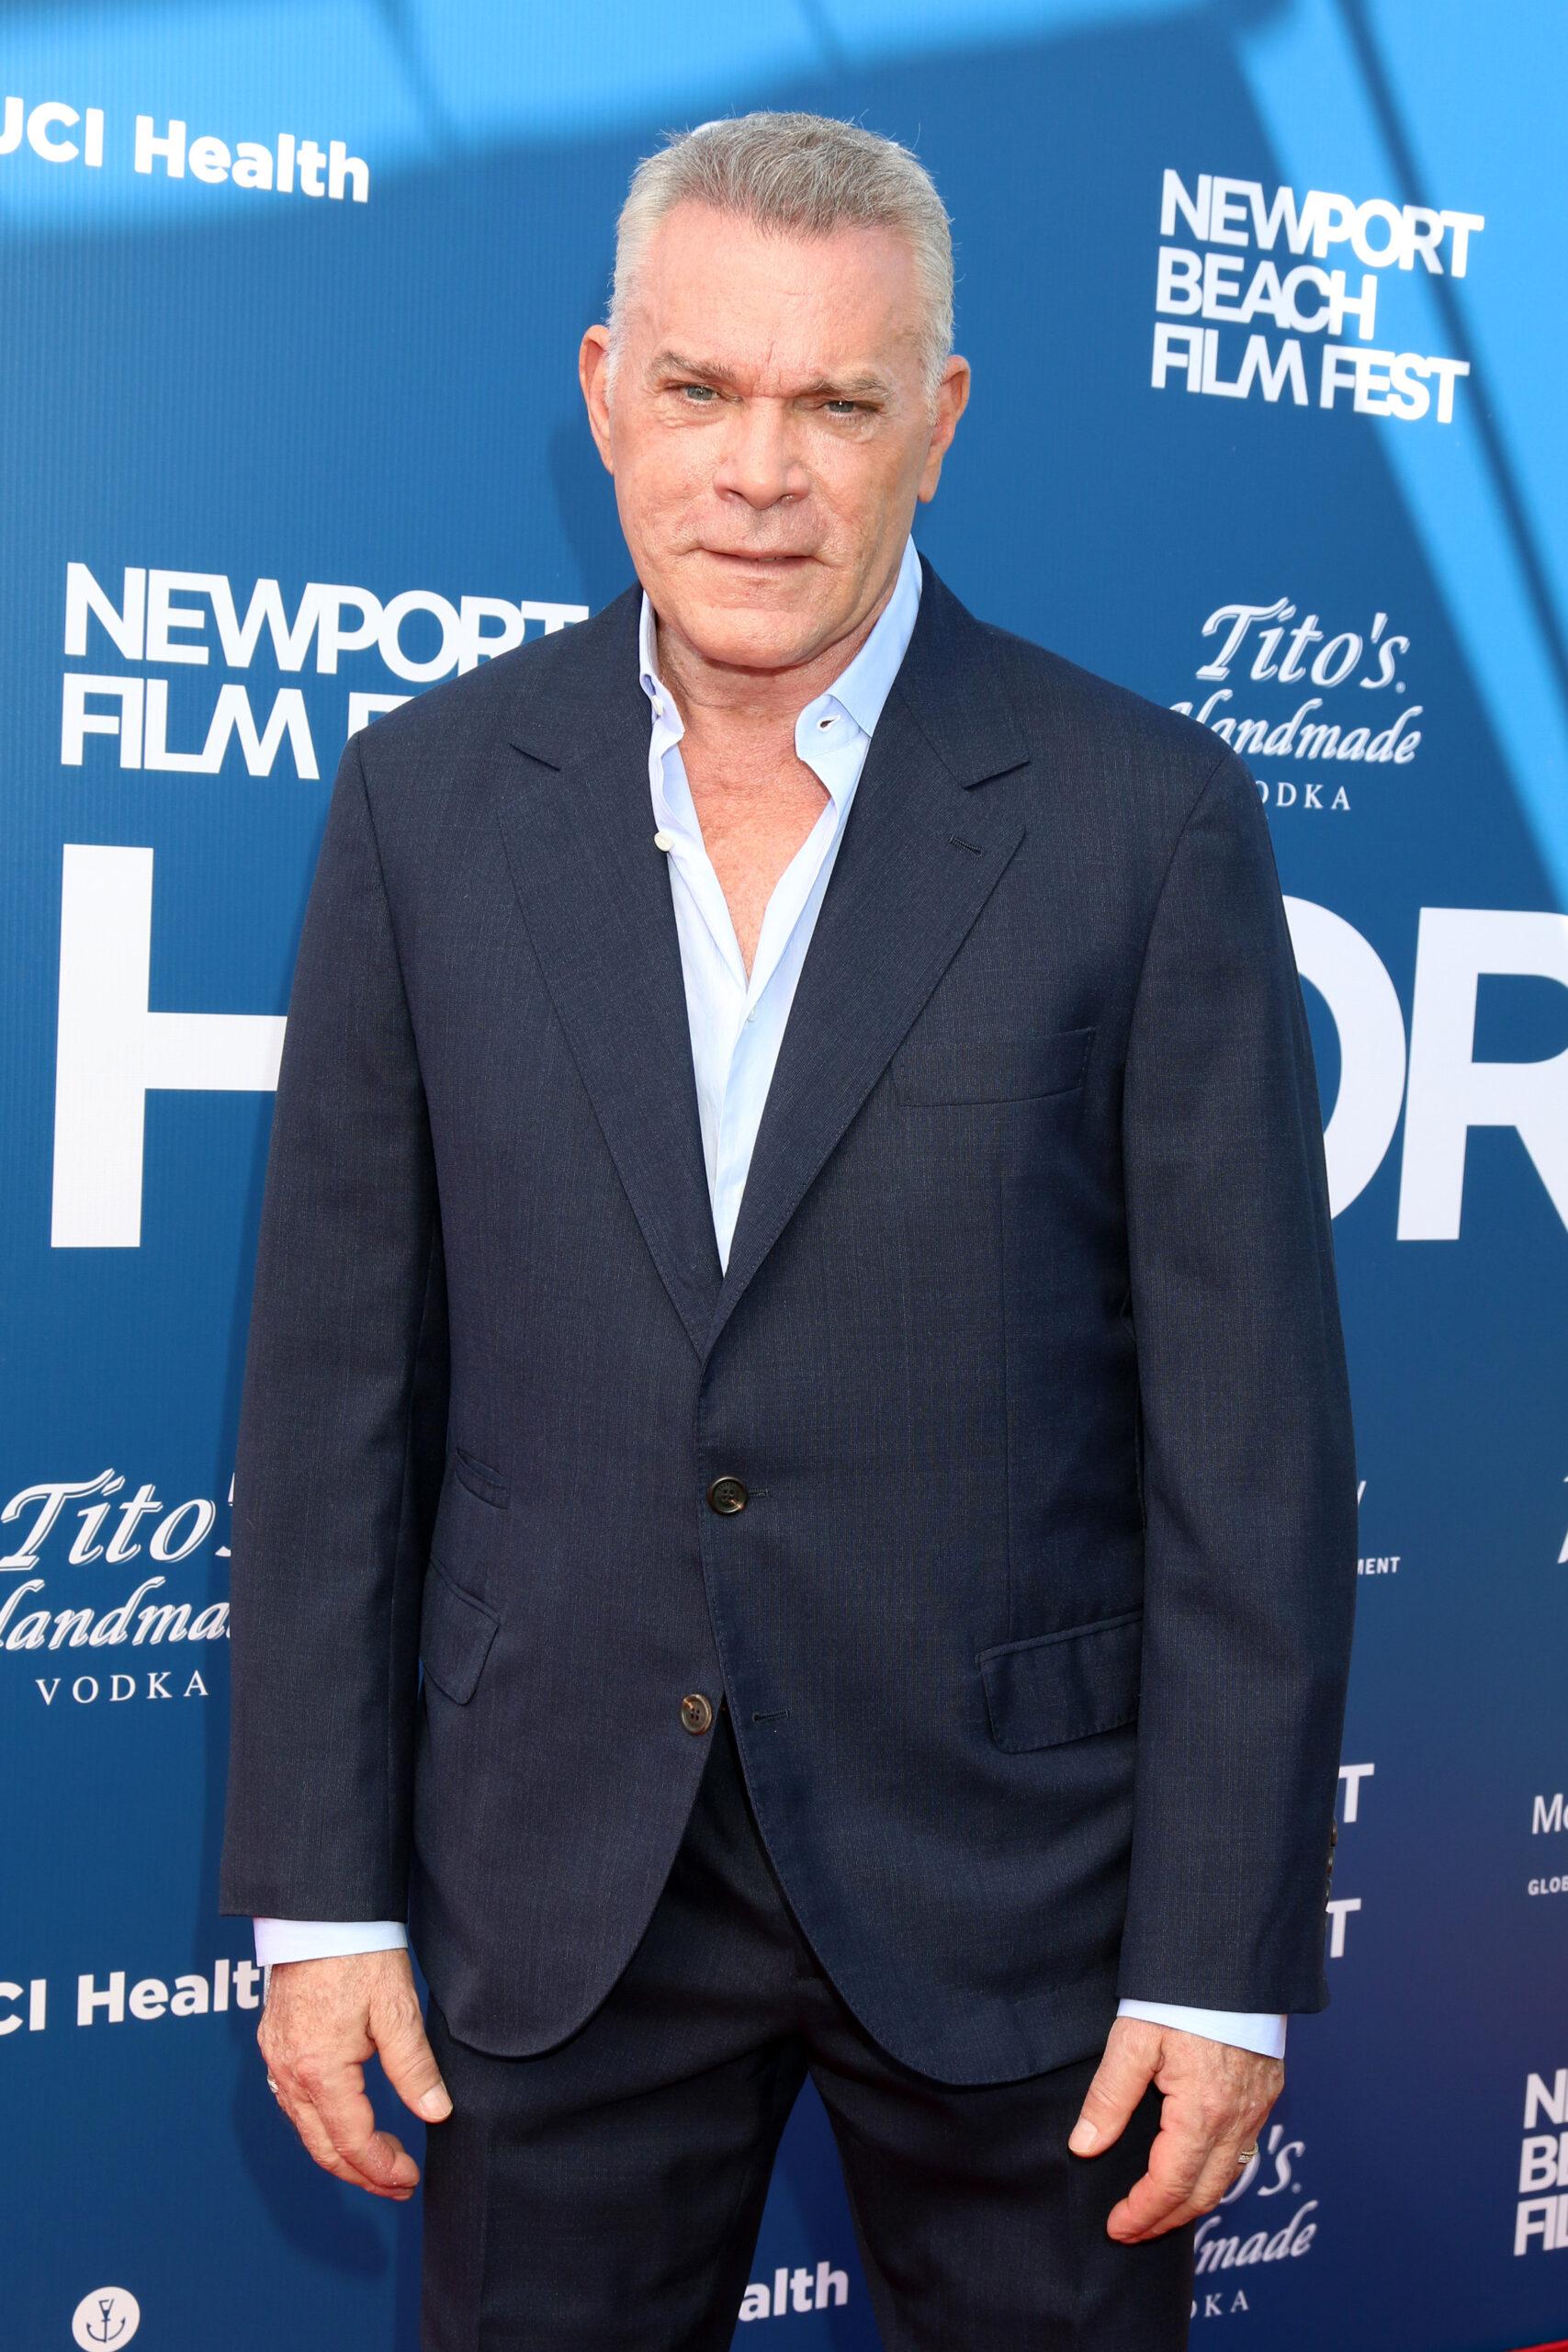 Ray Liotta at the 22nd Annual Newport Beach Film Festival Presents Festival Honors & Variety's 10 Actors To Watch - Newport Beach